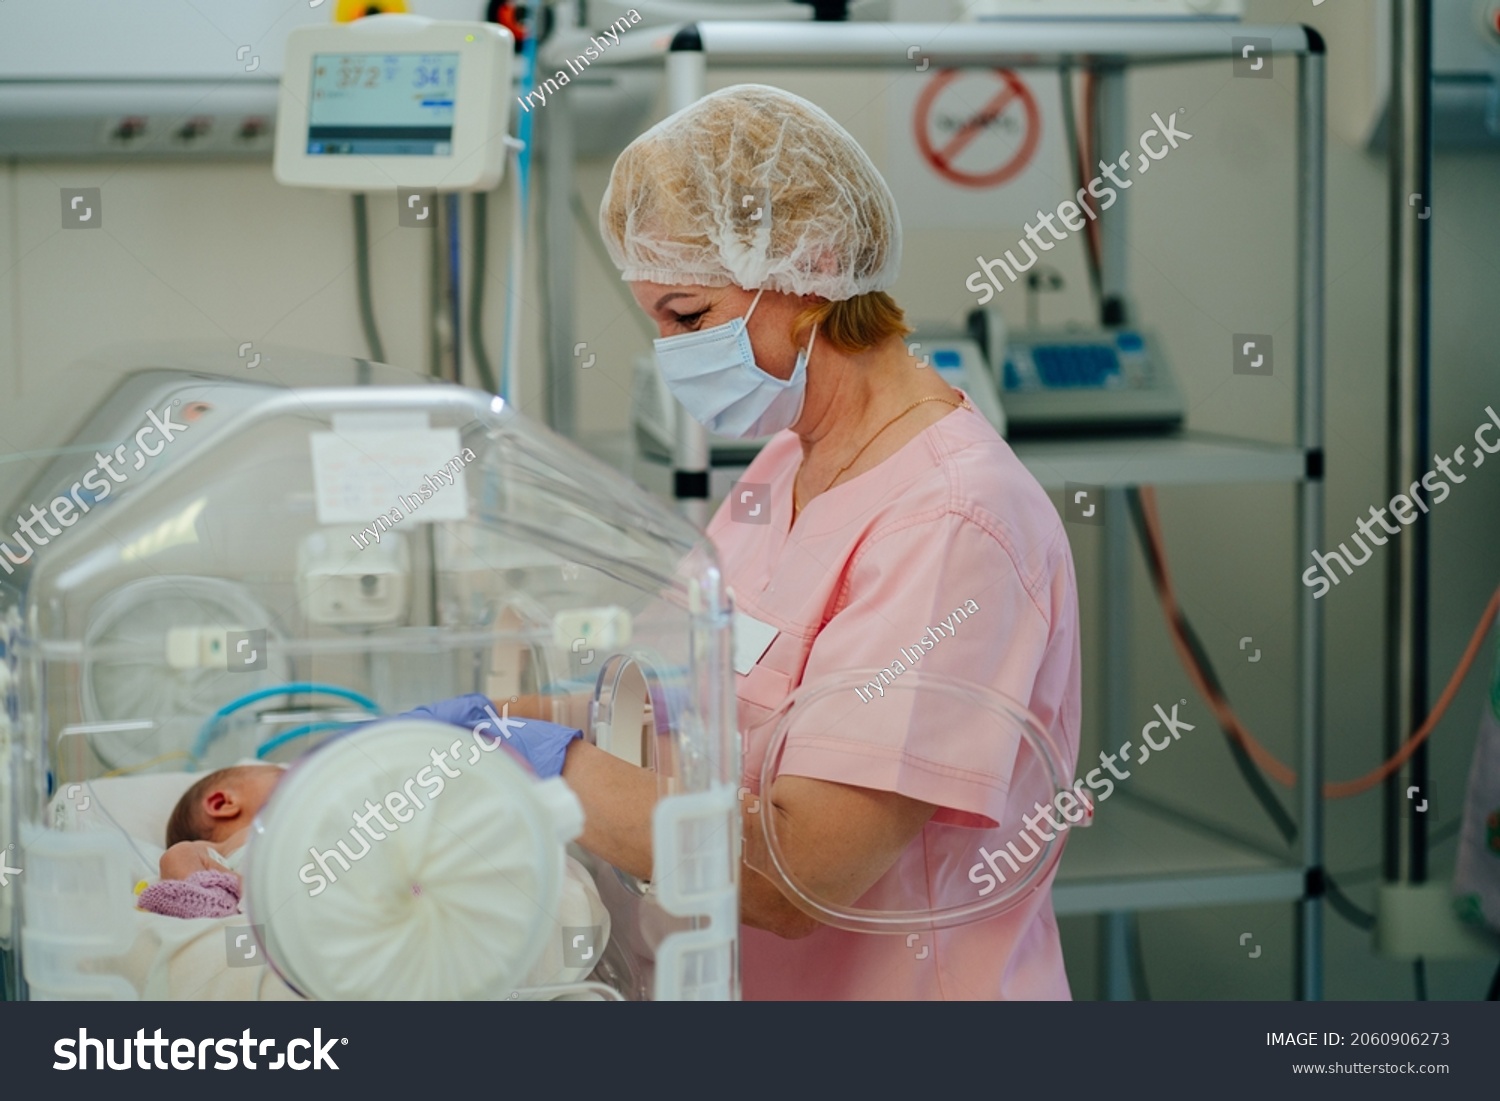 At the intensive care unit. Nurse standing near hospital bed with a baby preparing it for treatment. Newborn is placed in the incubator. Neonatal intensive care unit #2060906273